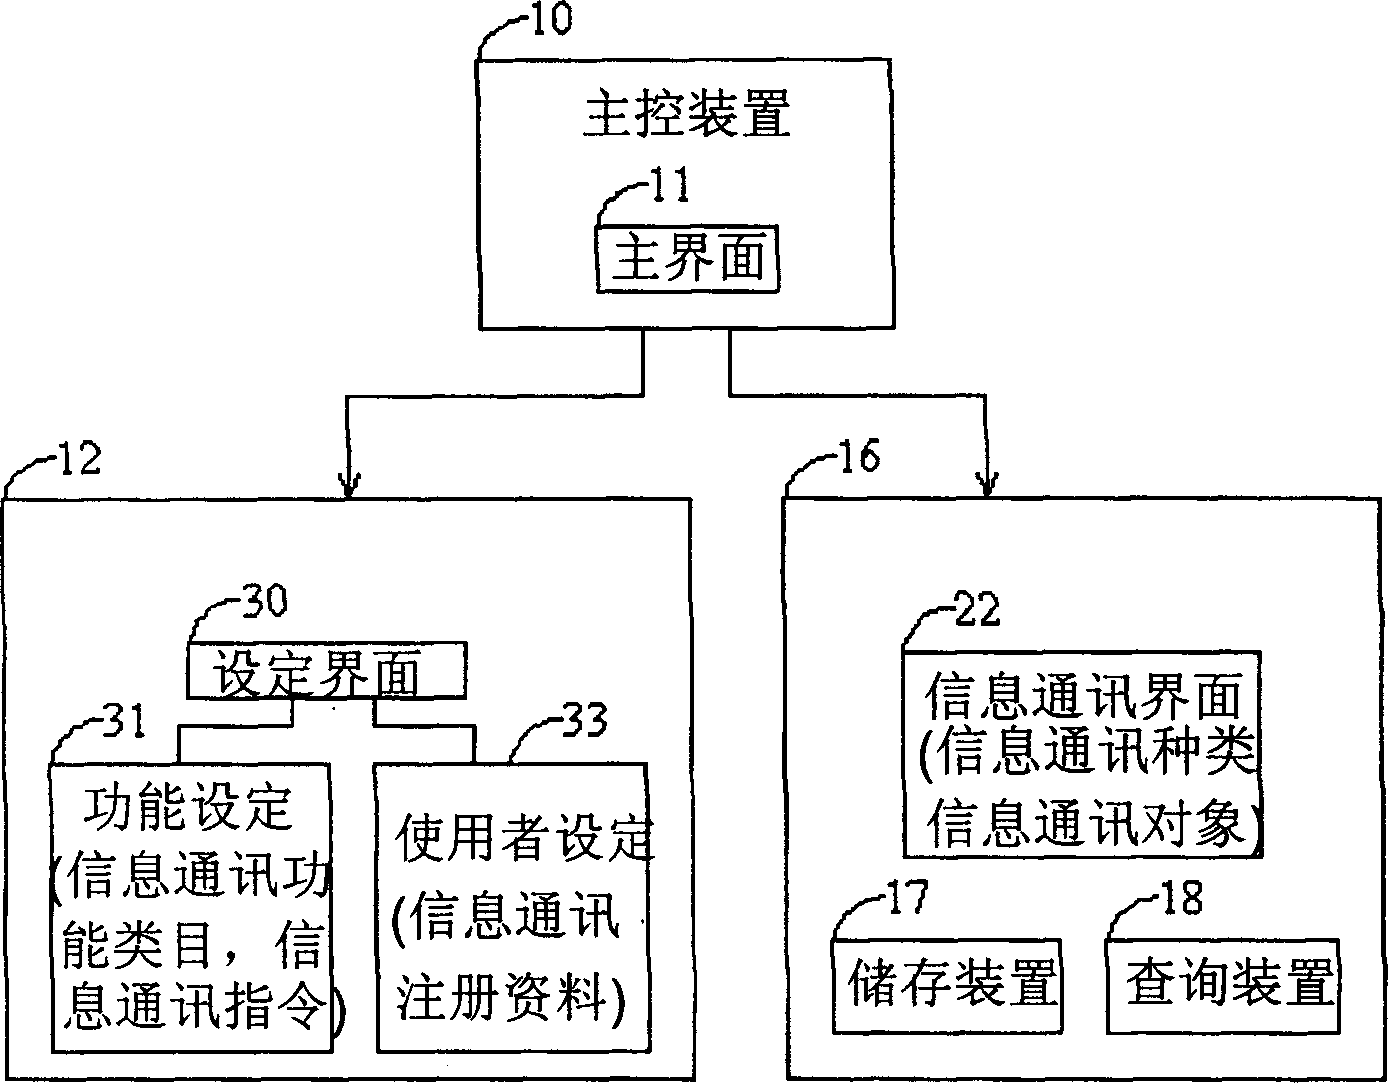 Information communication system and method thereof